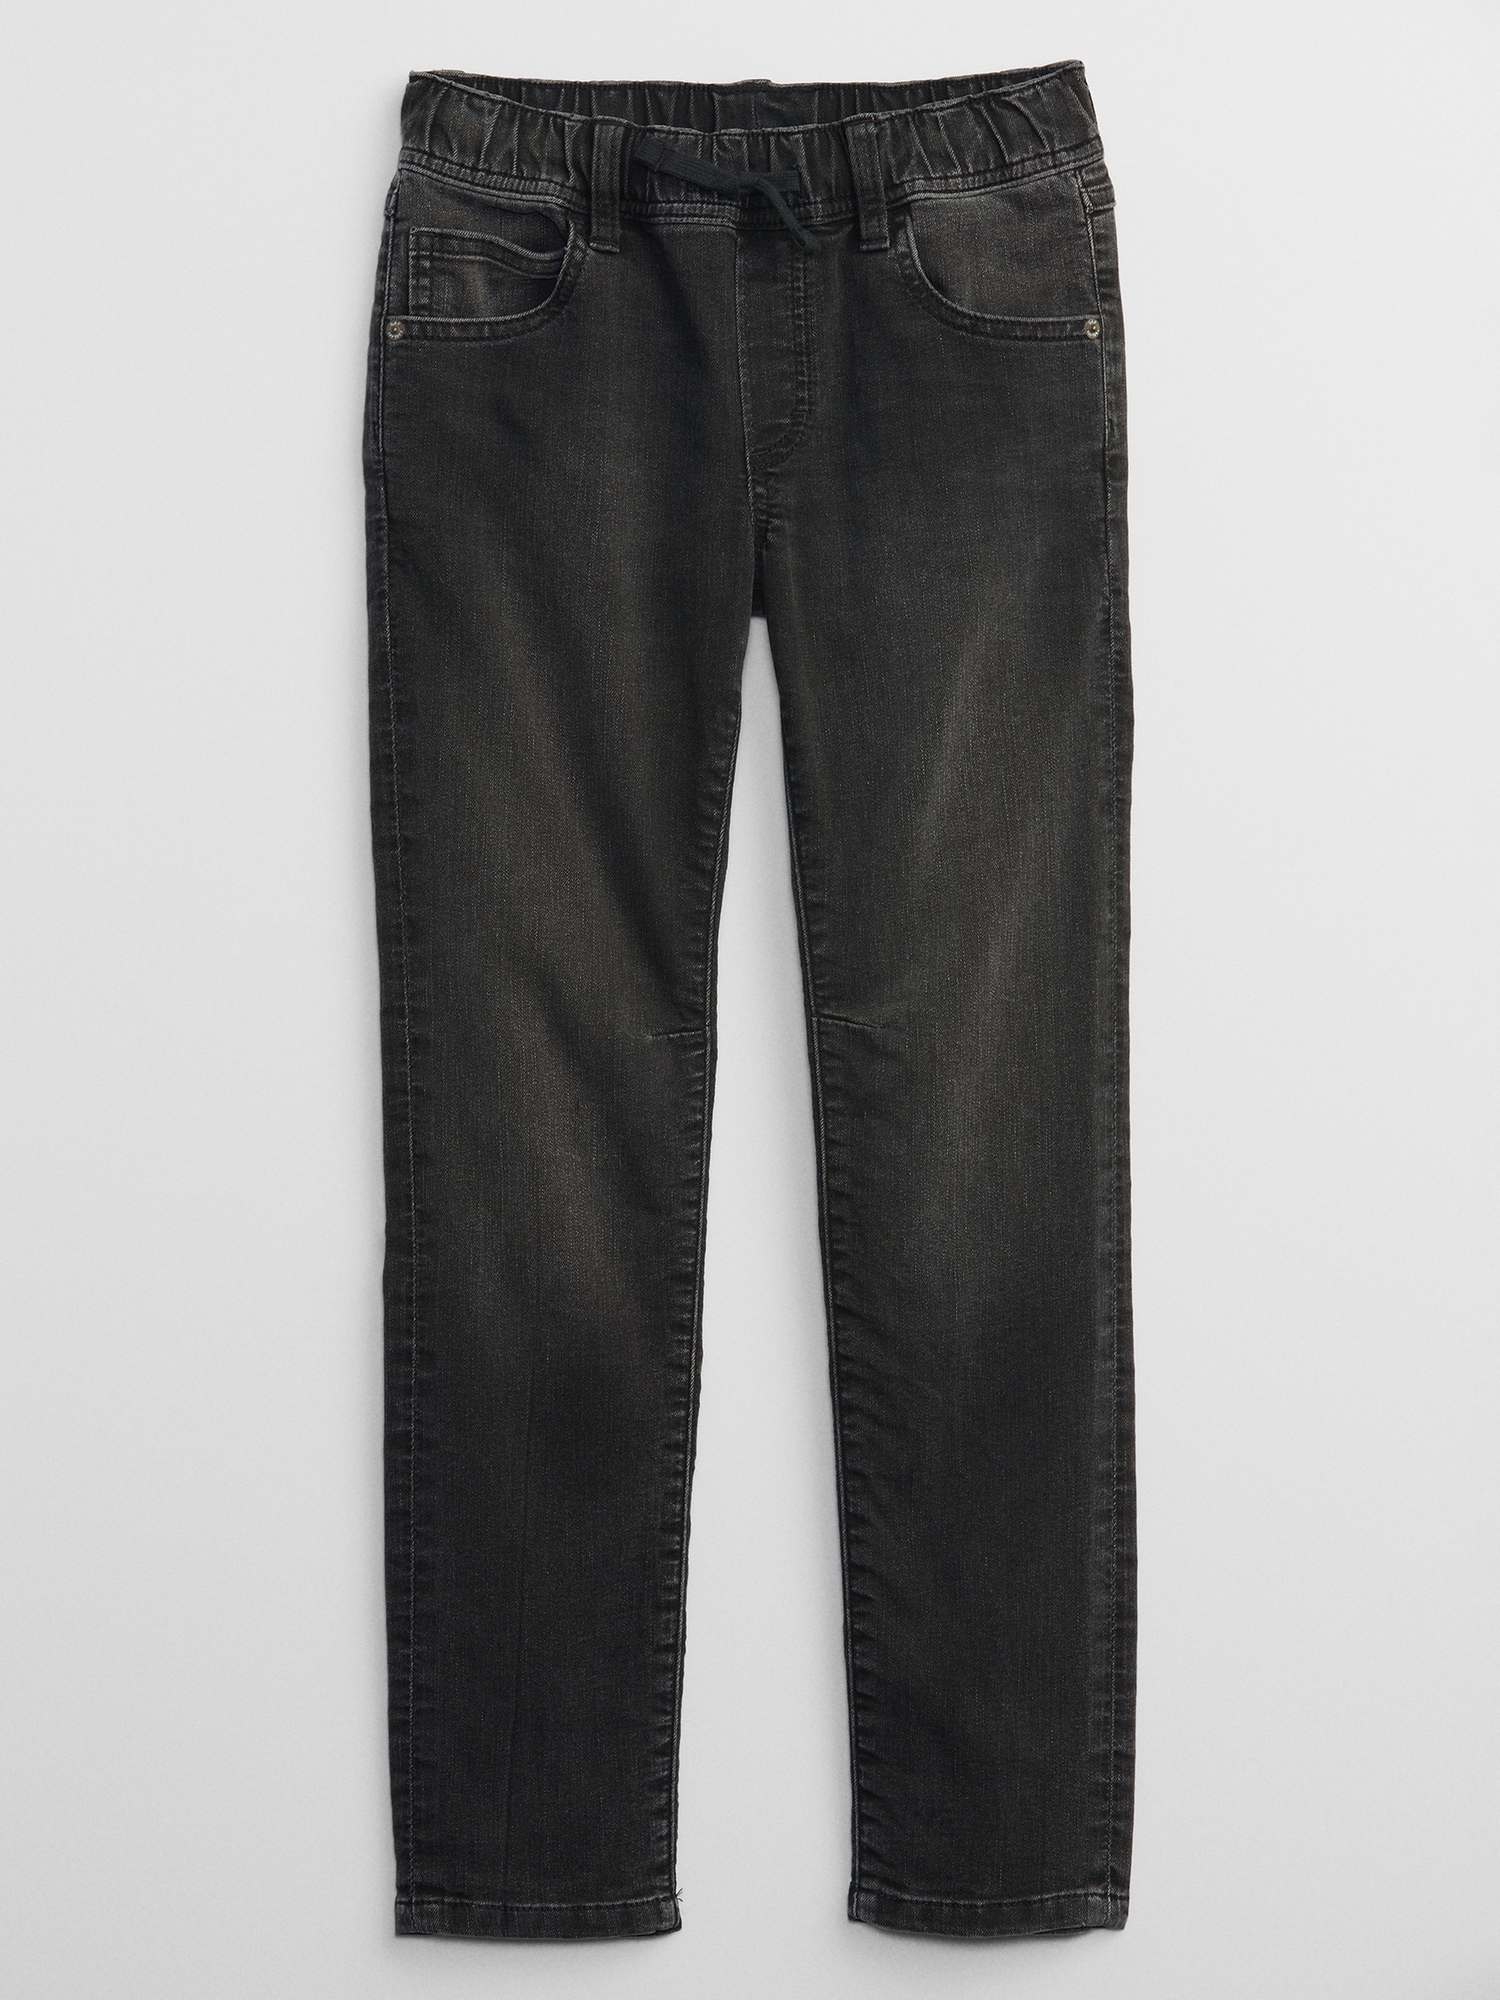 Kids Pull-On Slim Fit Jeans with Washwell | Gap Factory